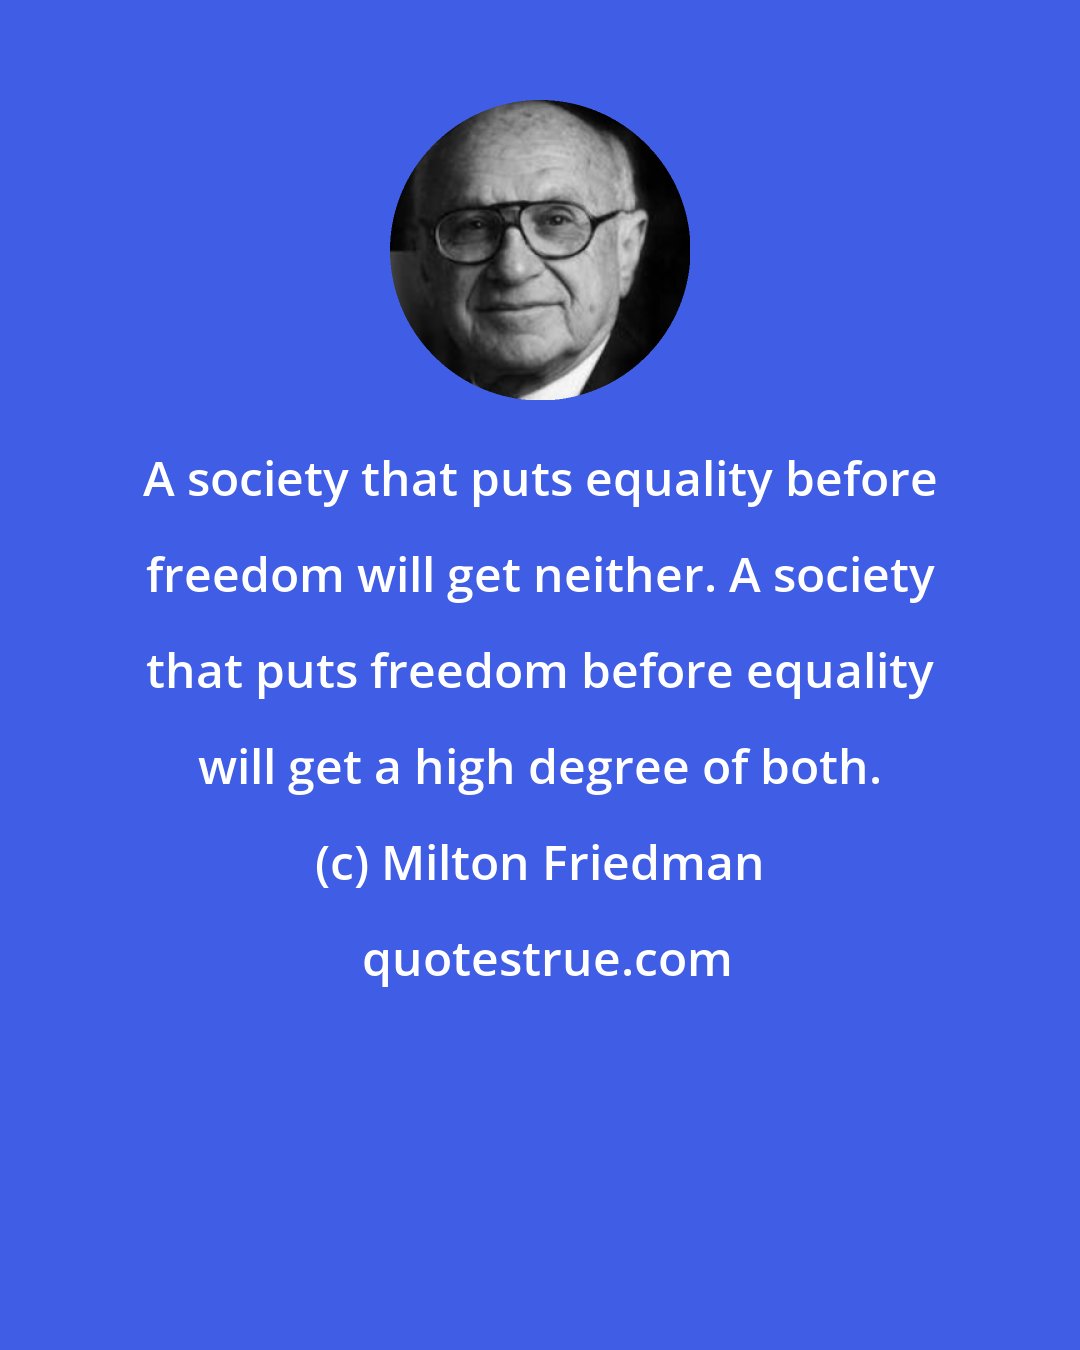 Milton Friedman: A society that puts equality before freedom will get neither. A society that puts freedom before equality will get a high degree of both.